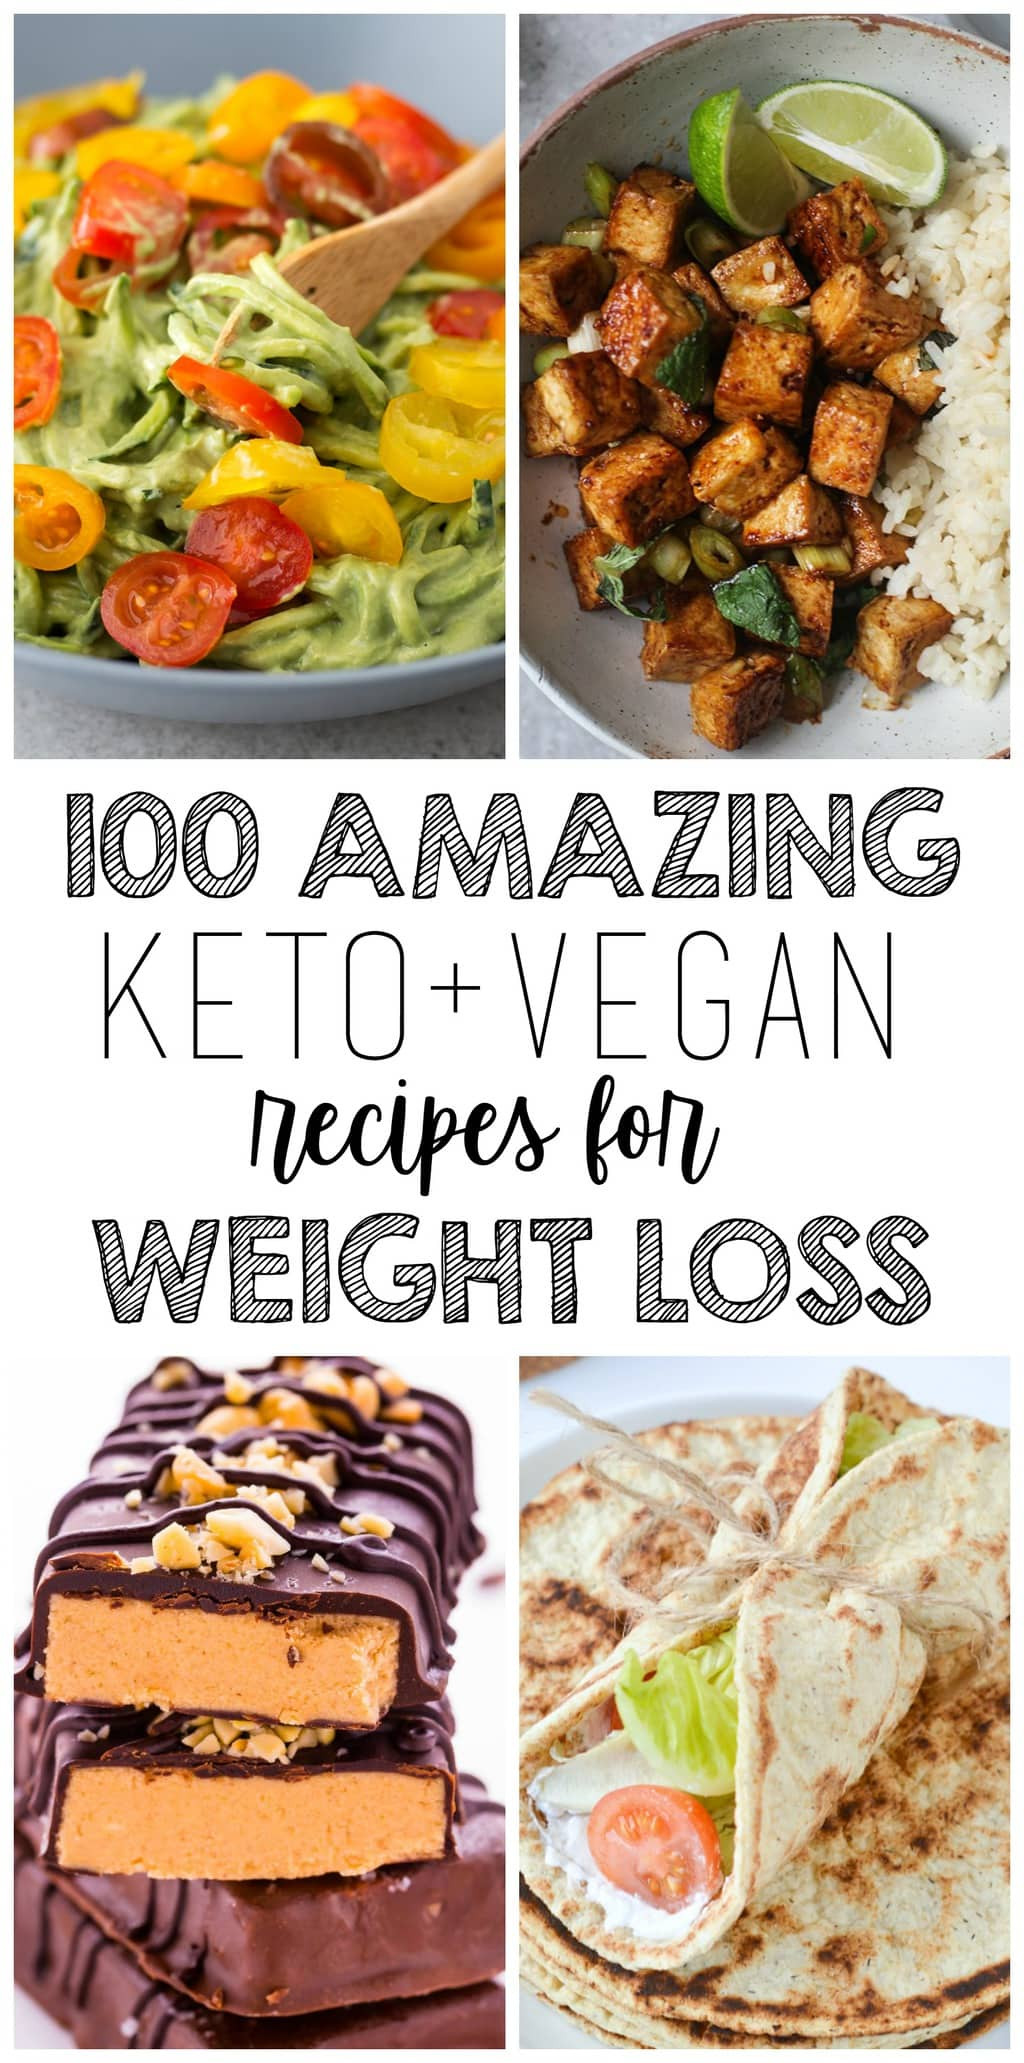 Vegan Keto Diet For Weight Loss 100 AMAZING Keto Vegan Recipes For Weight Loss